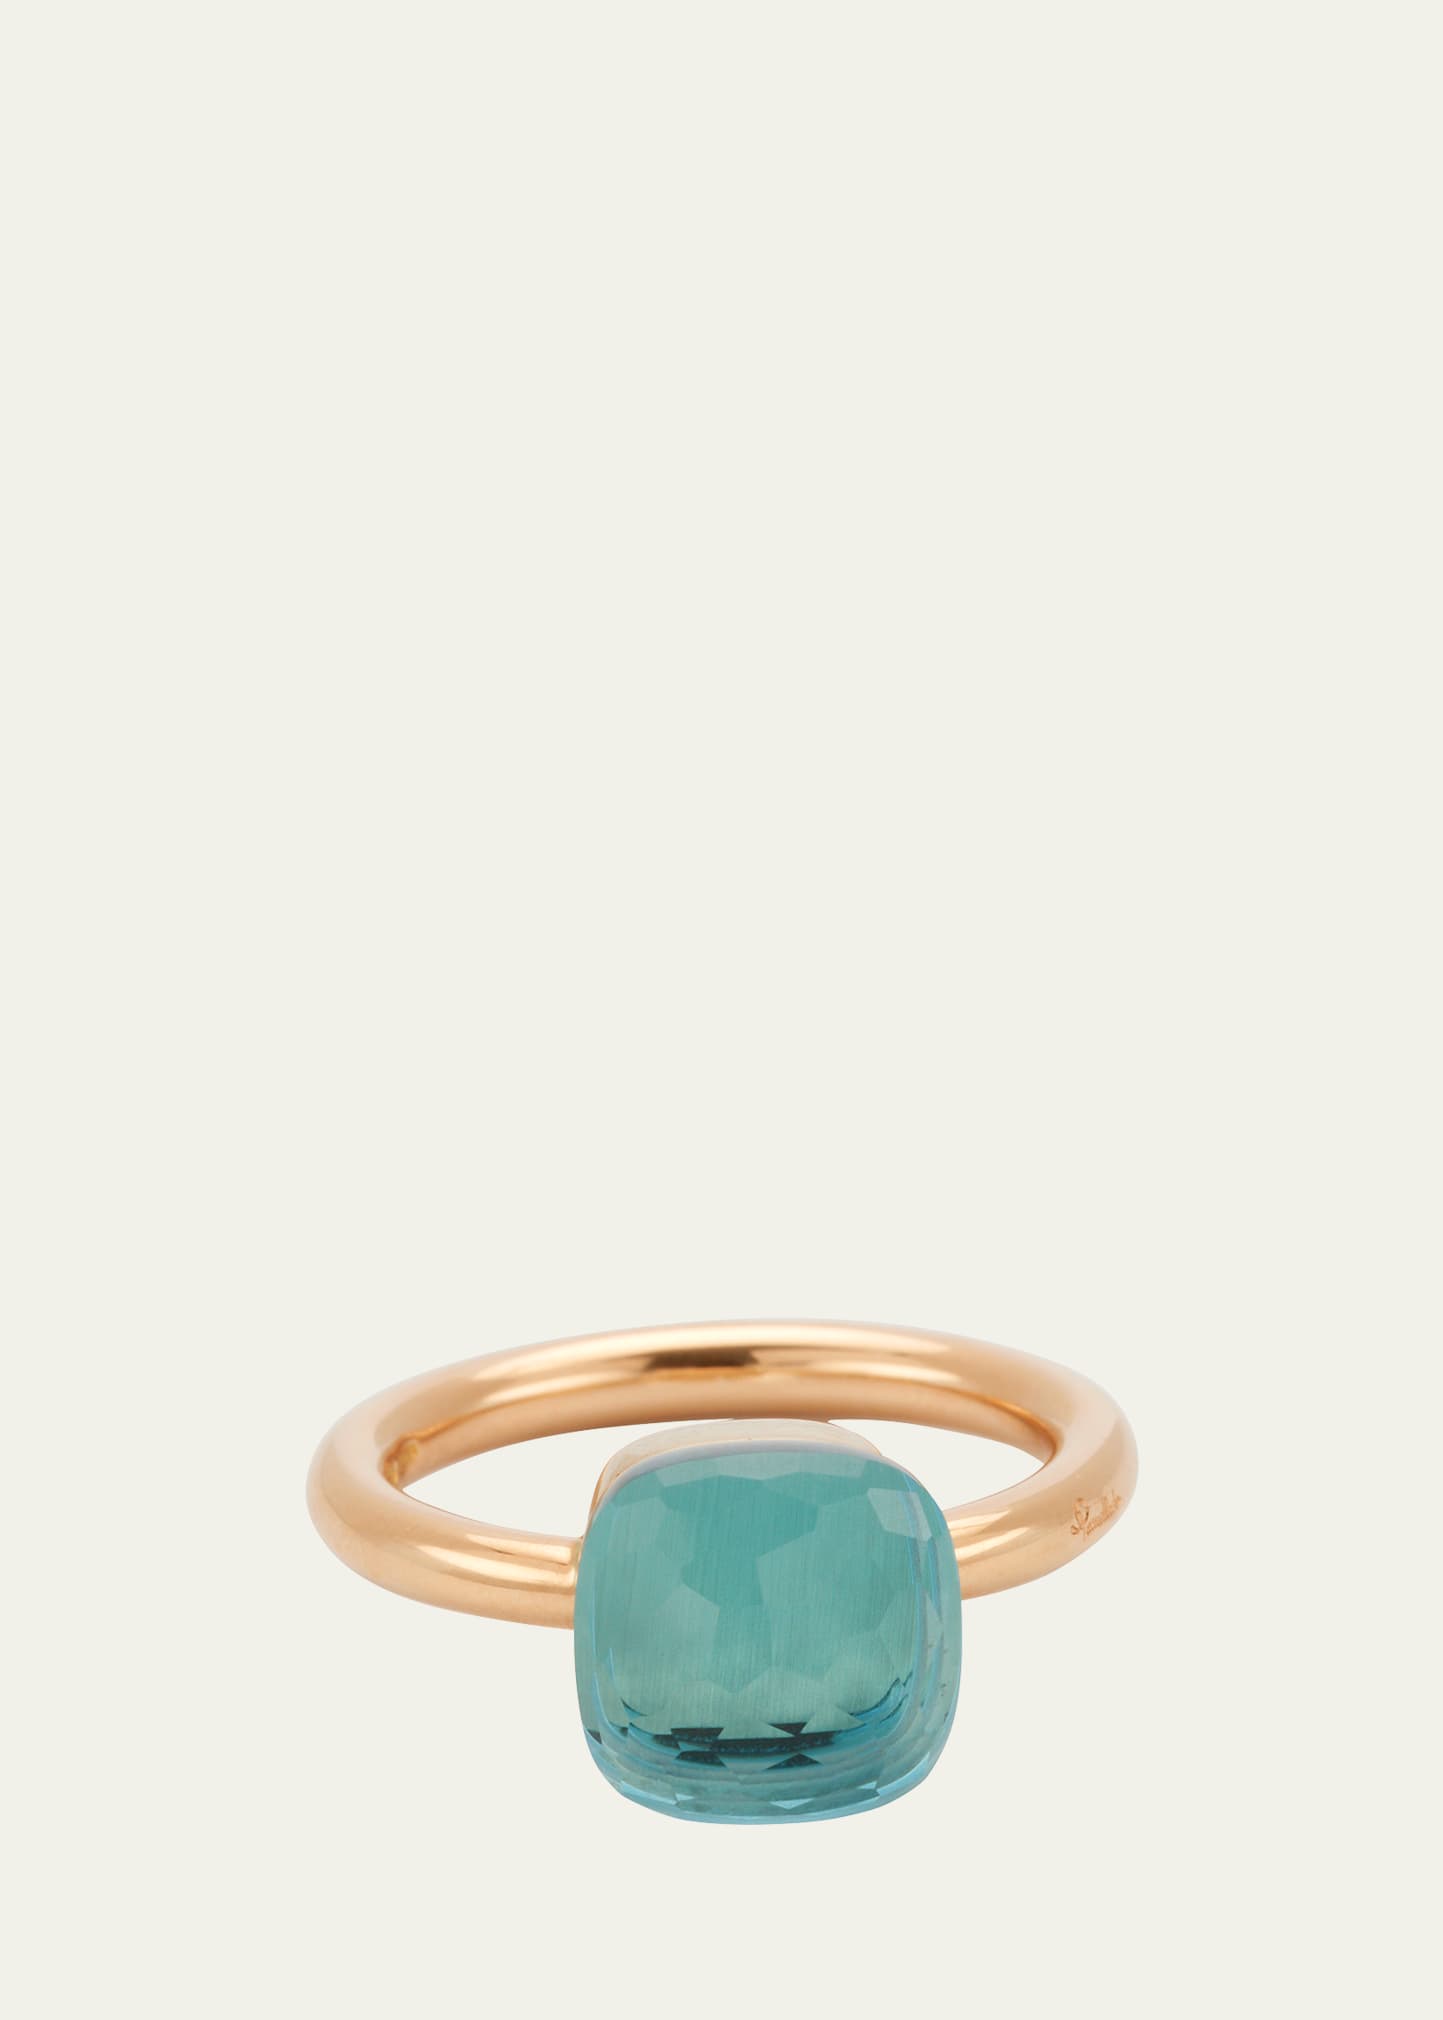 Nudo Classic 18k Gold Ring with Blue Topaz